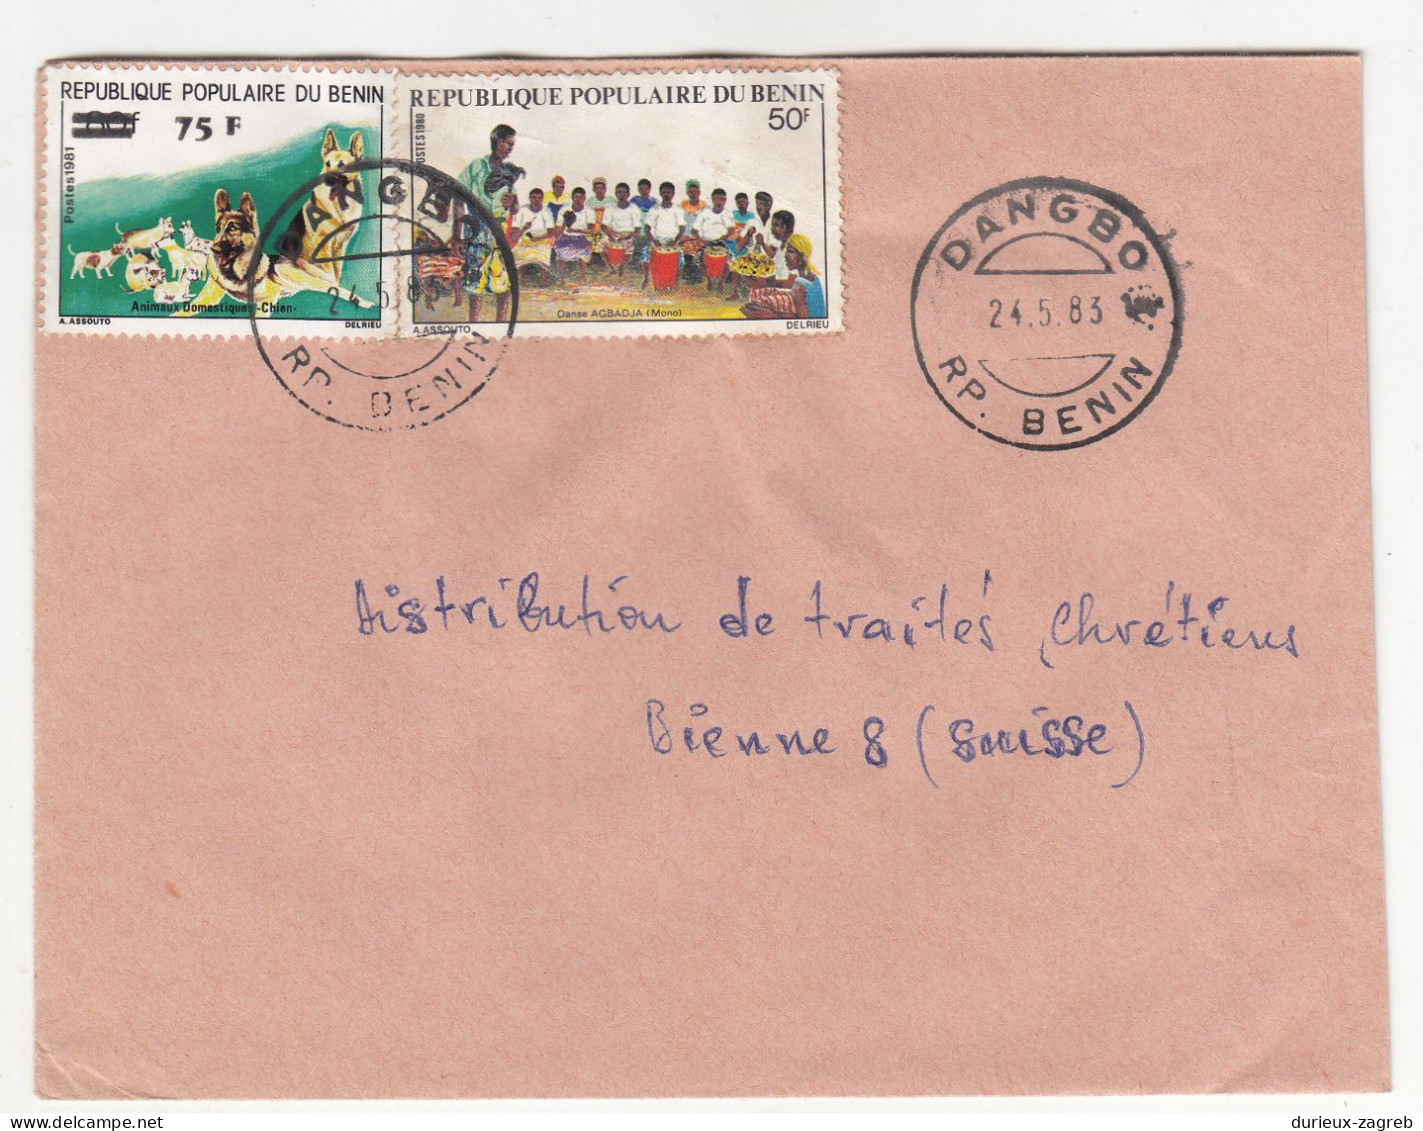 Benin 16 letter covers posted 1979-1988 to Switzerland b240510